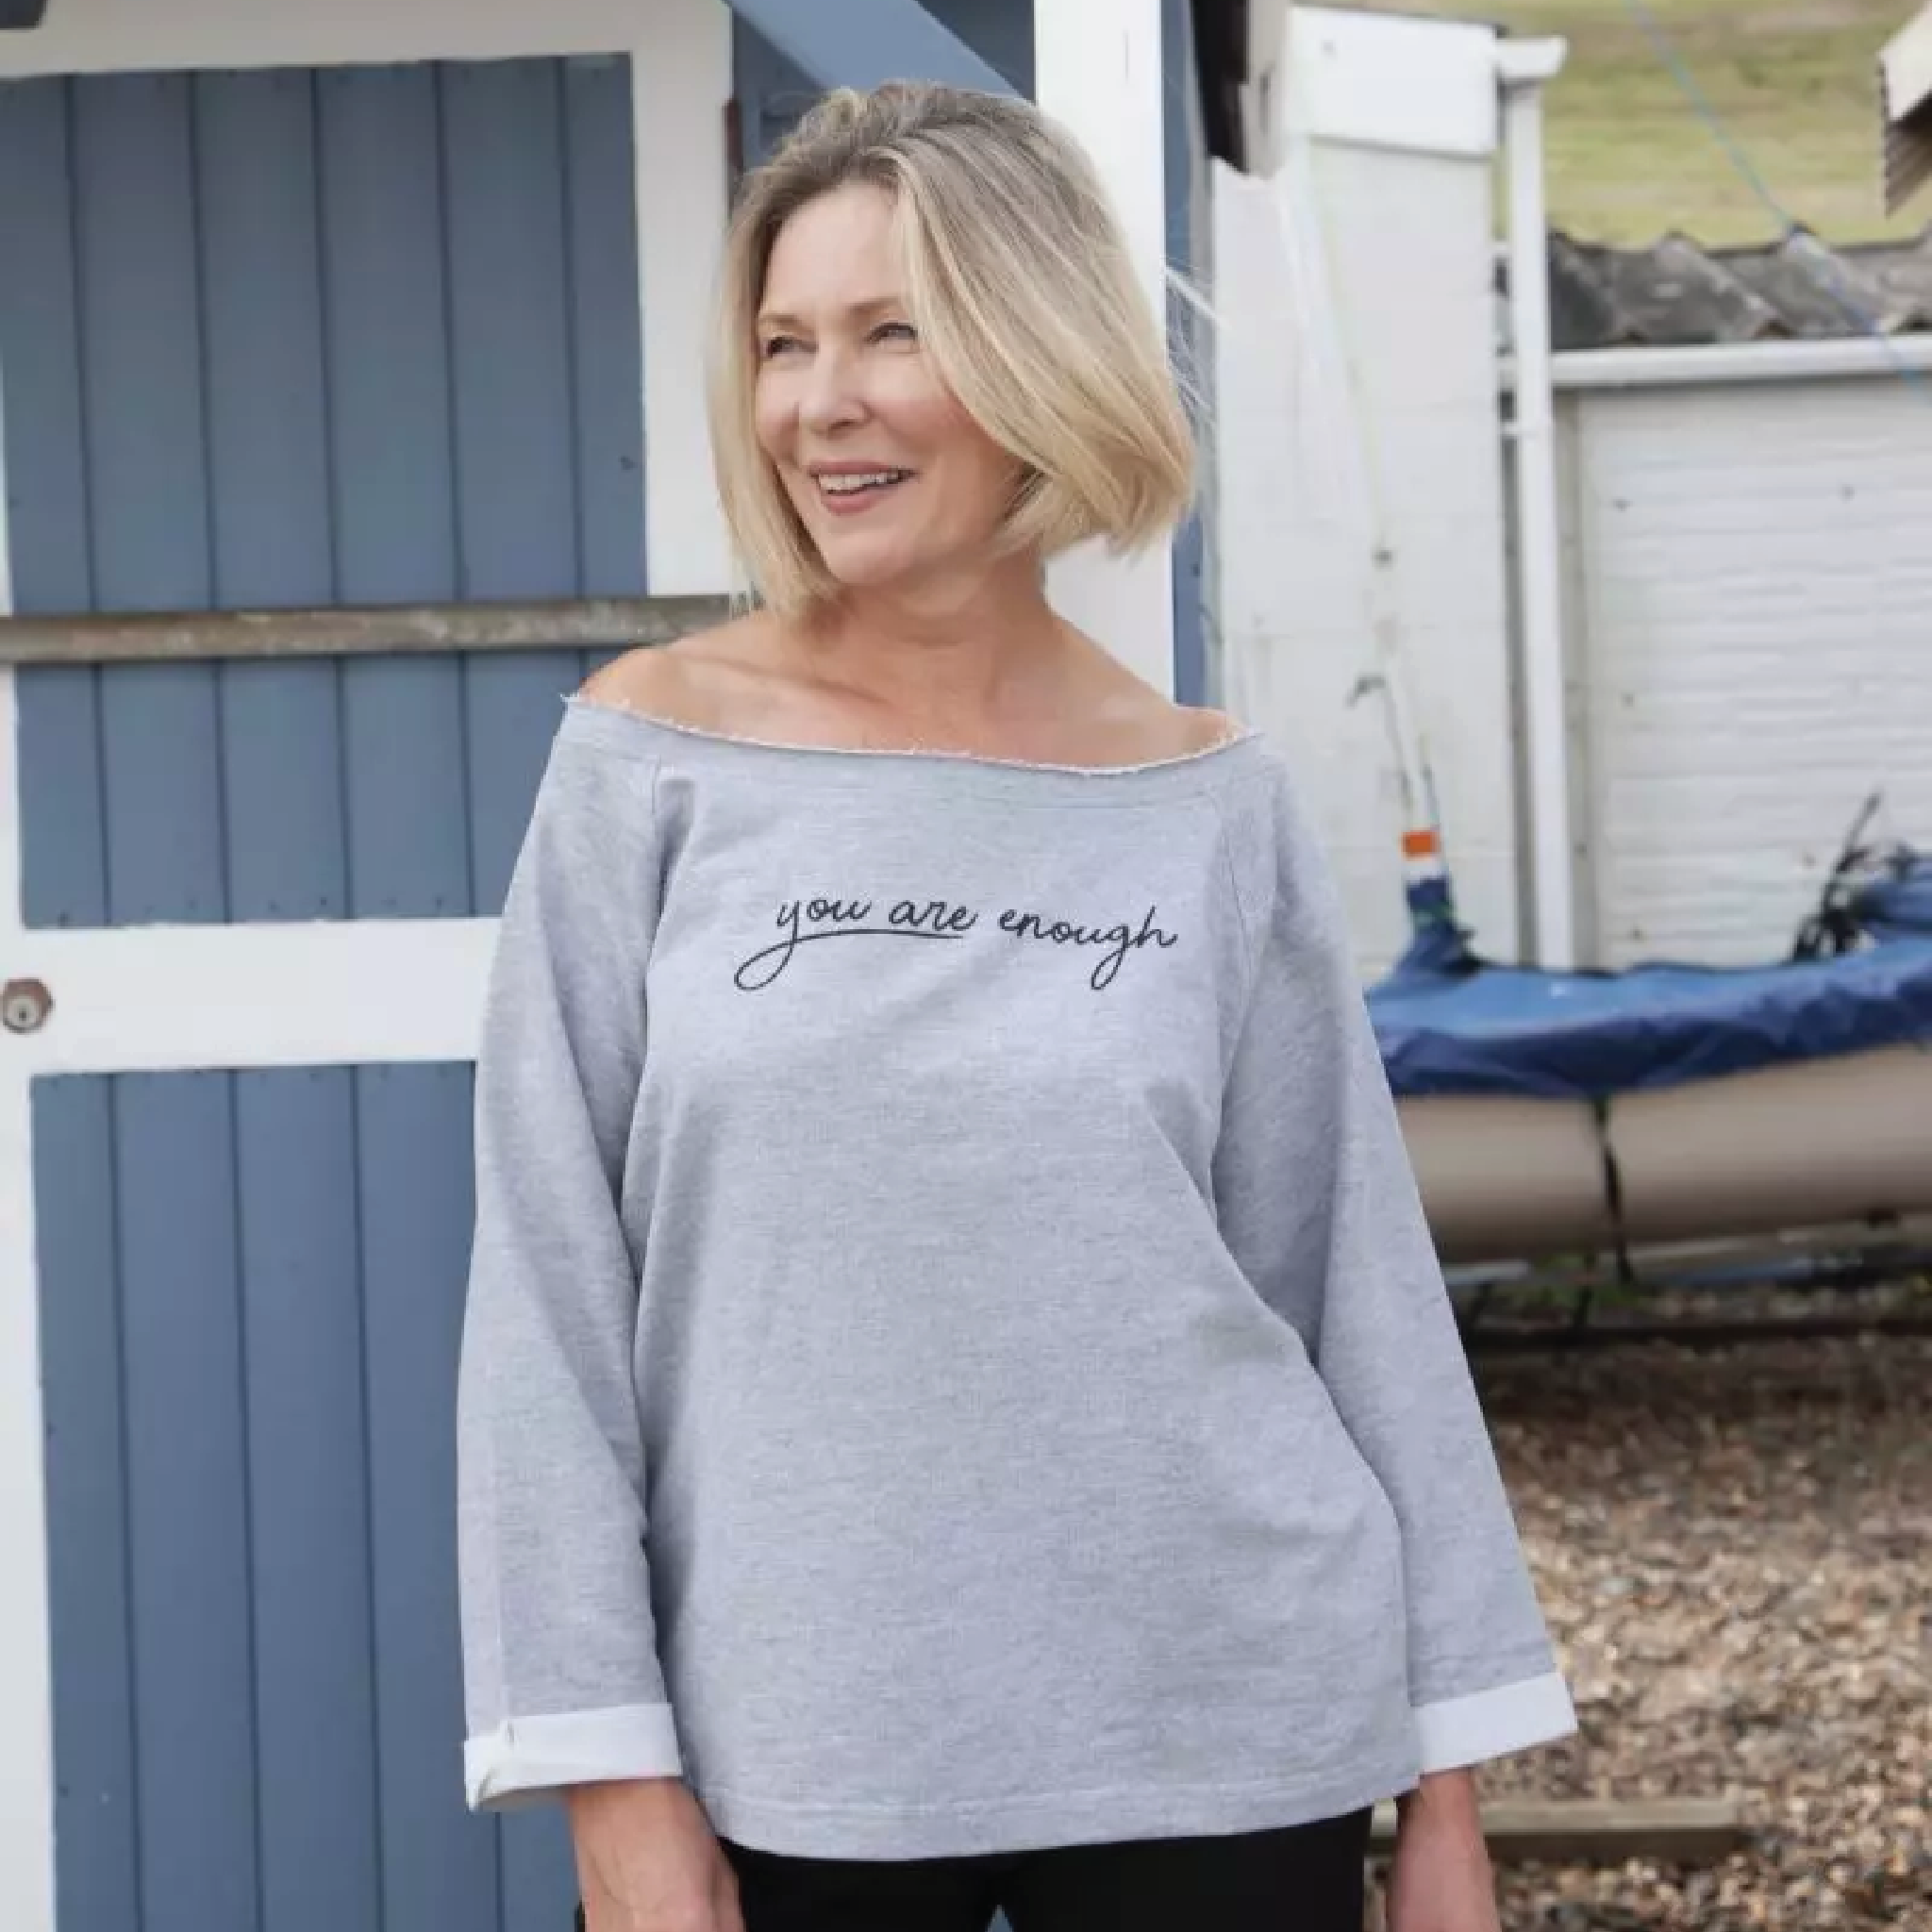 ‘You are enough’ Women’s Oversized Charcoal Sweater